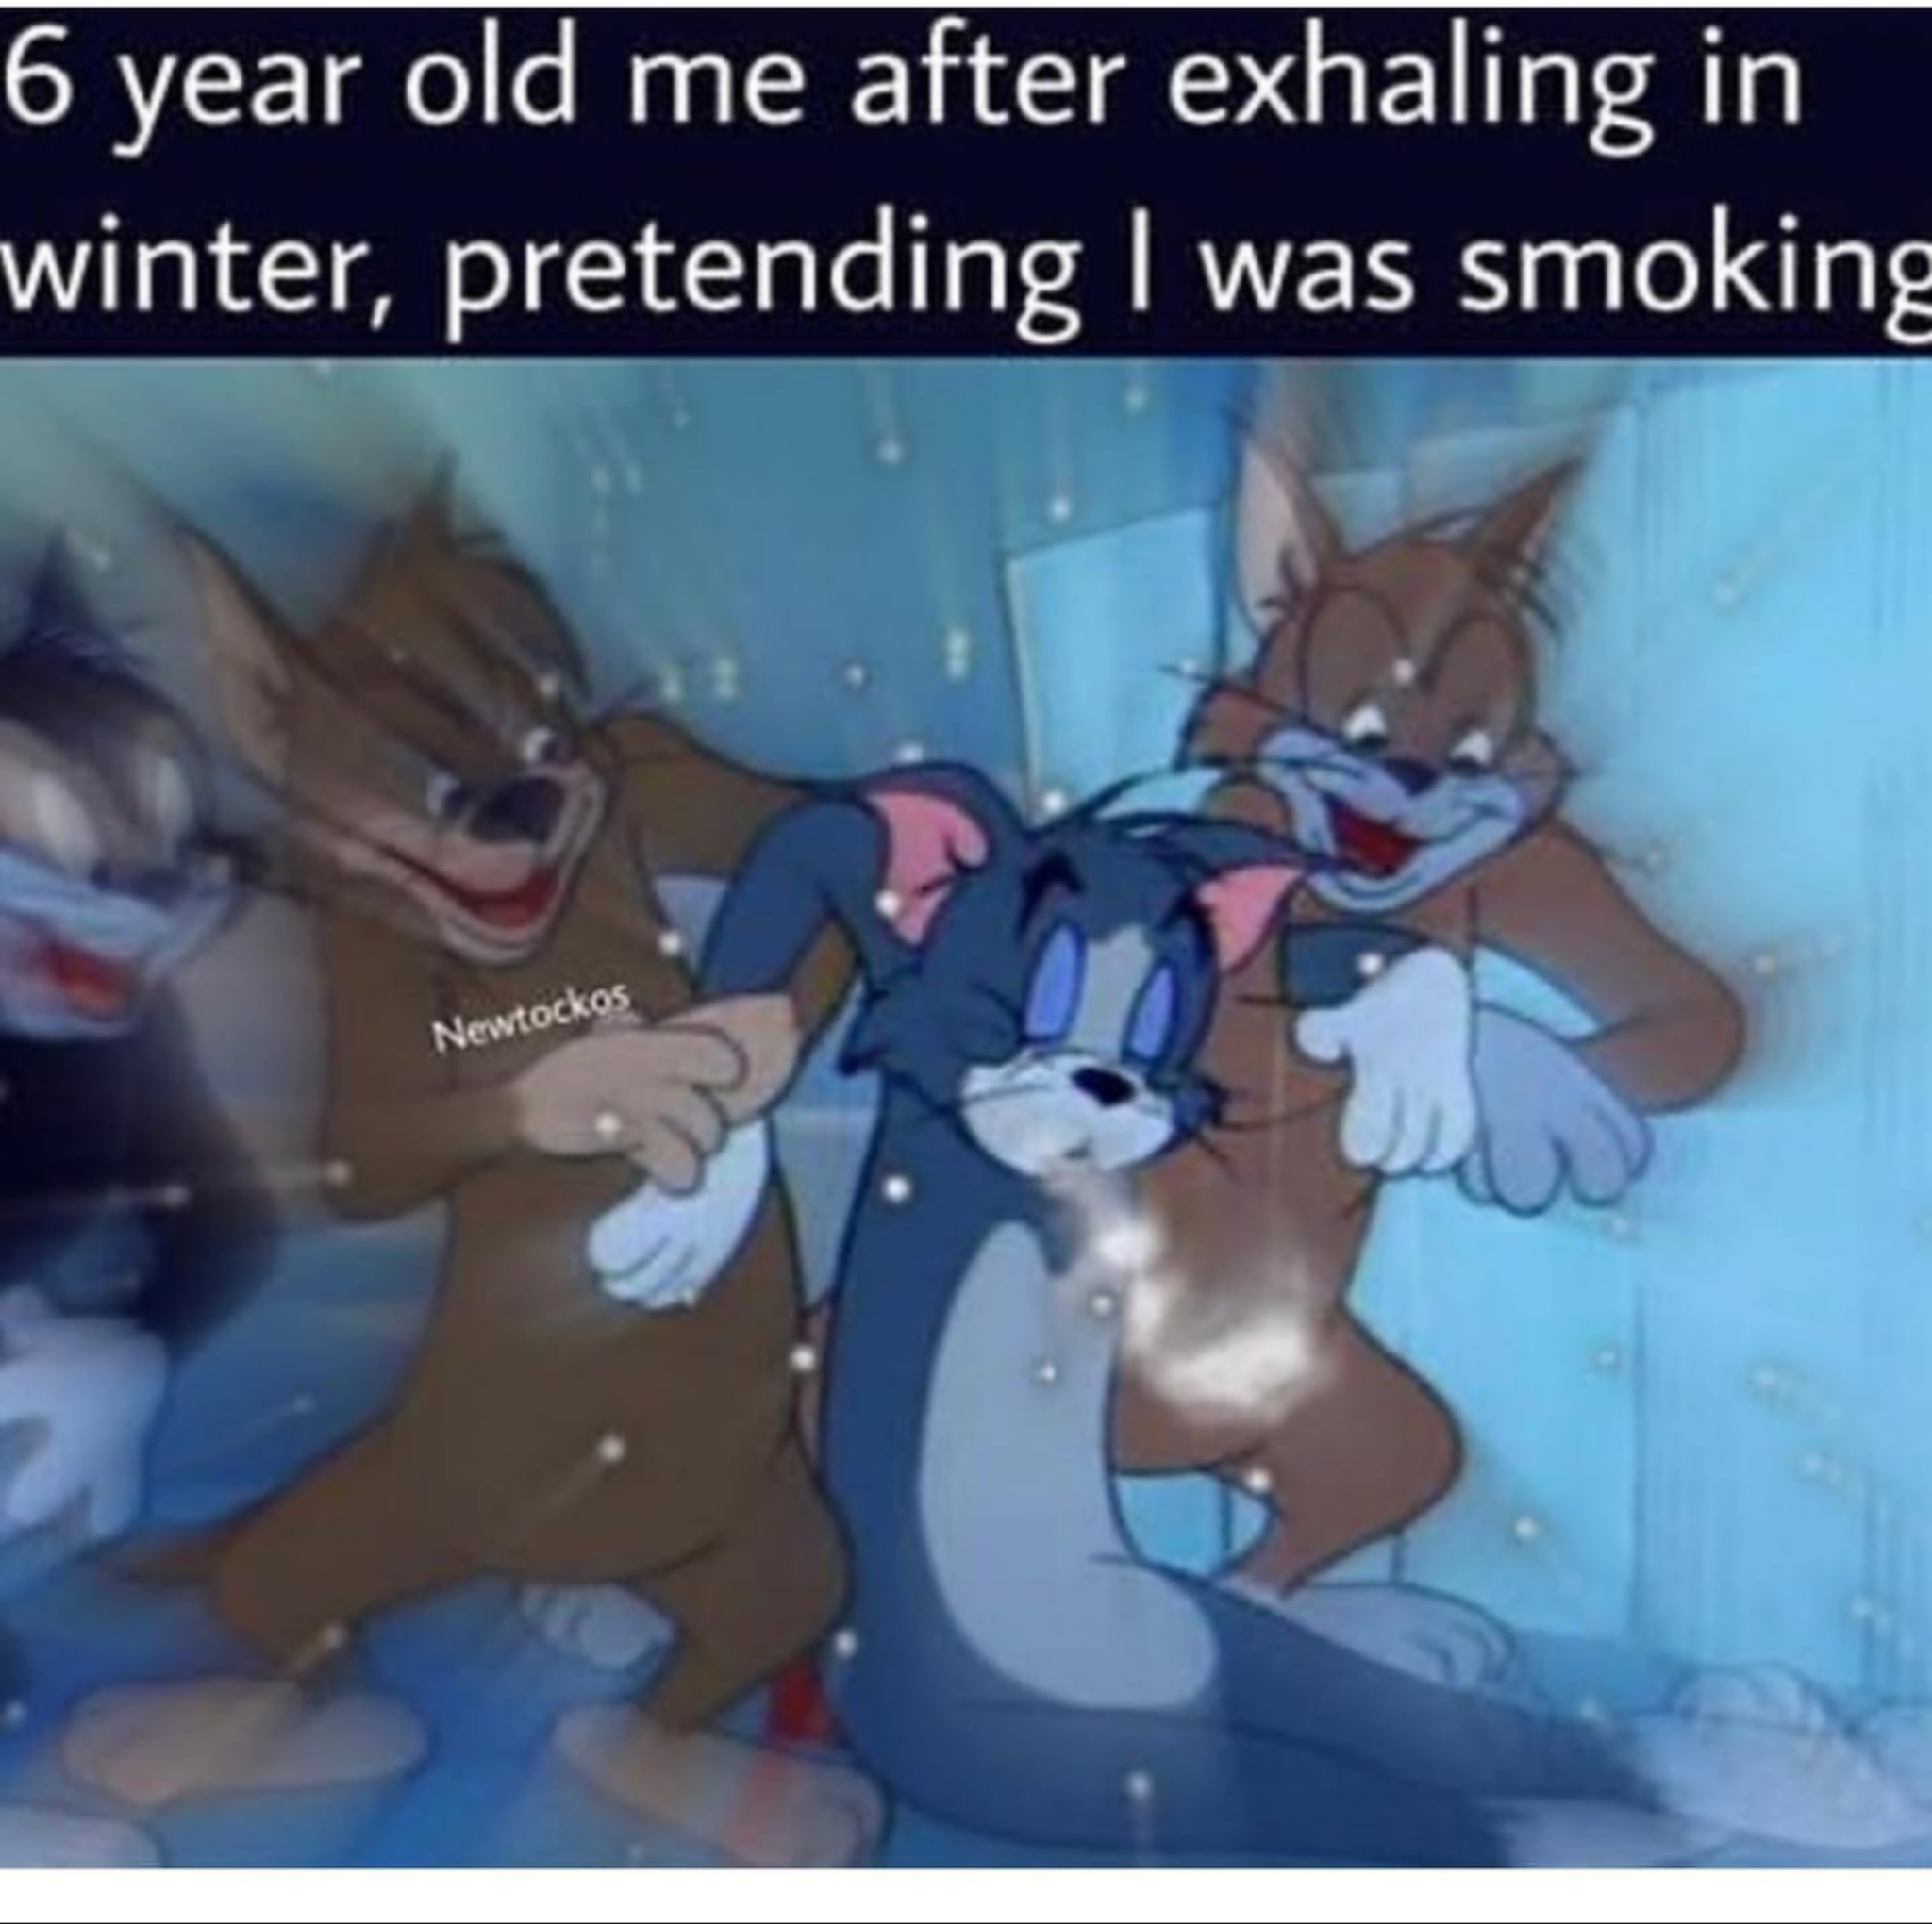 Humour - 6 year old me after exhaling in winter, pretending I was smoking Newtockos